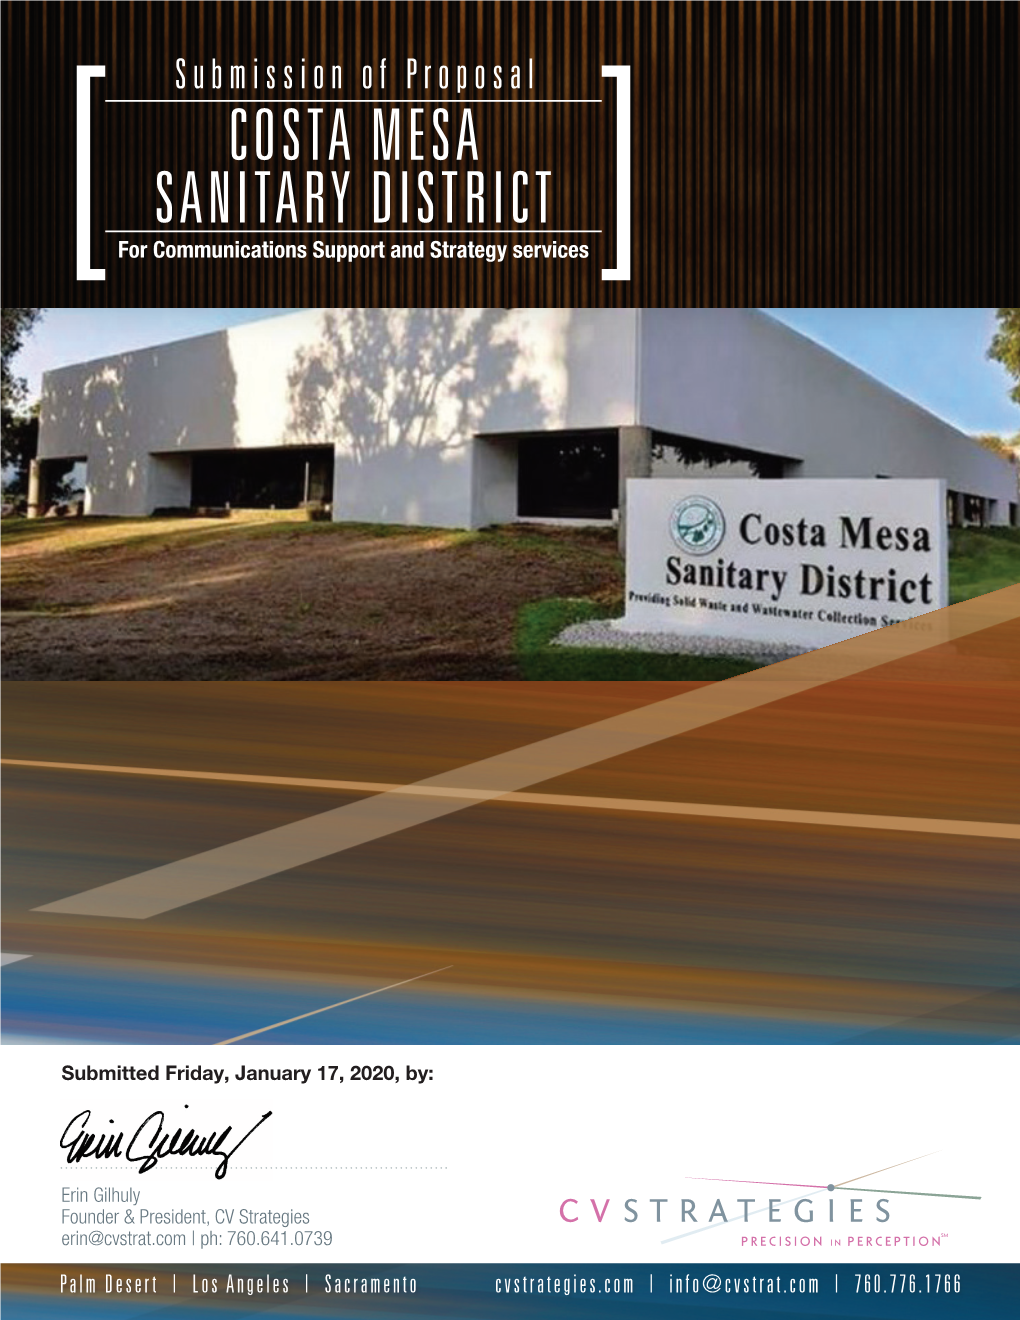 COSTA MESA SANITARY DISTRICT for Communications Support and Strategy Services